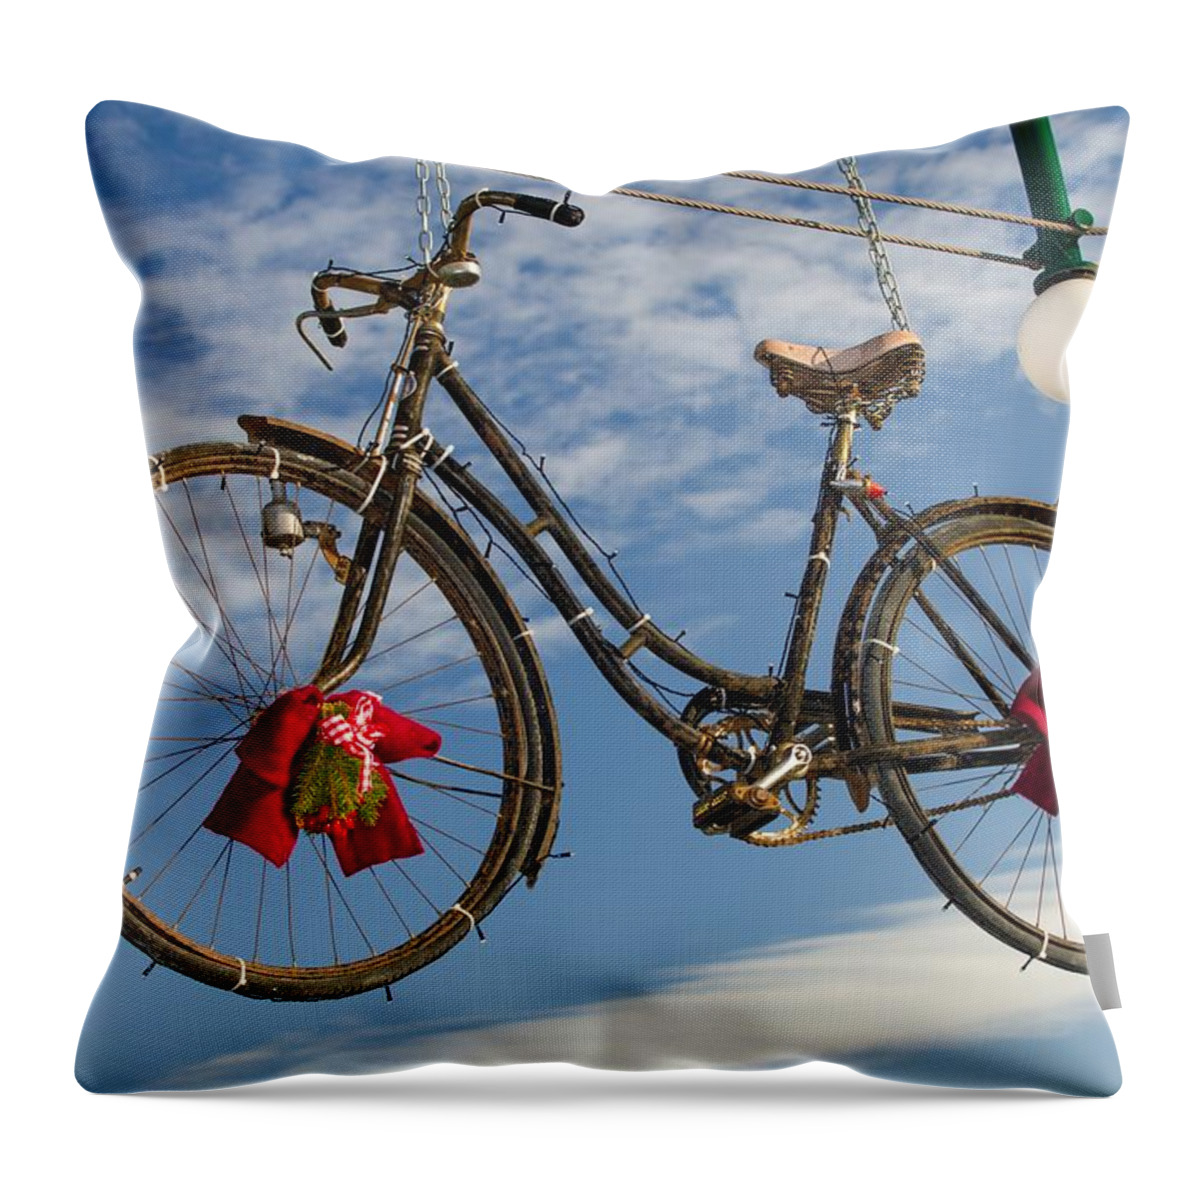 Bike Throw Pillow featuring the photograph Christmas Bicycle by Andreas Berthold